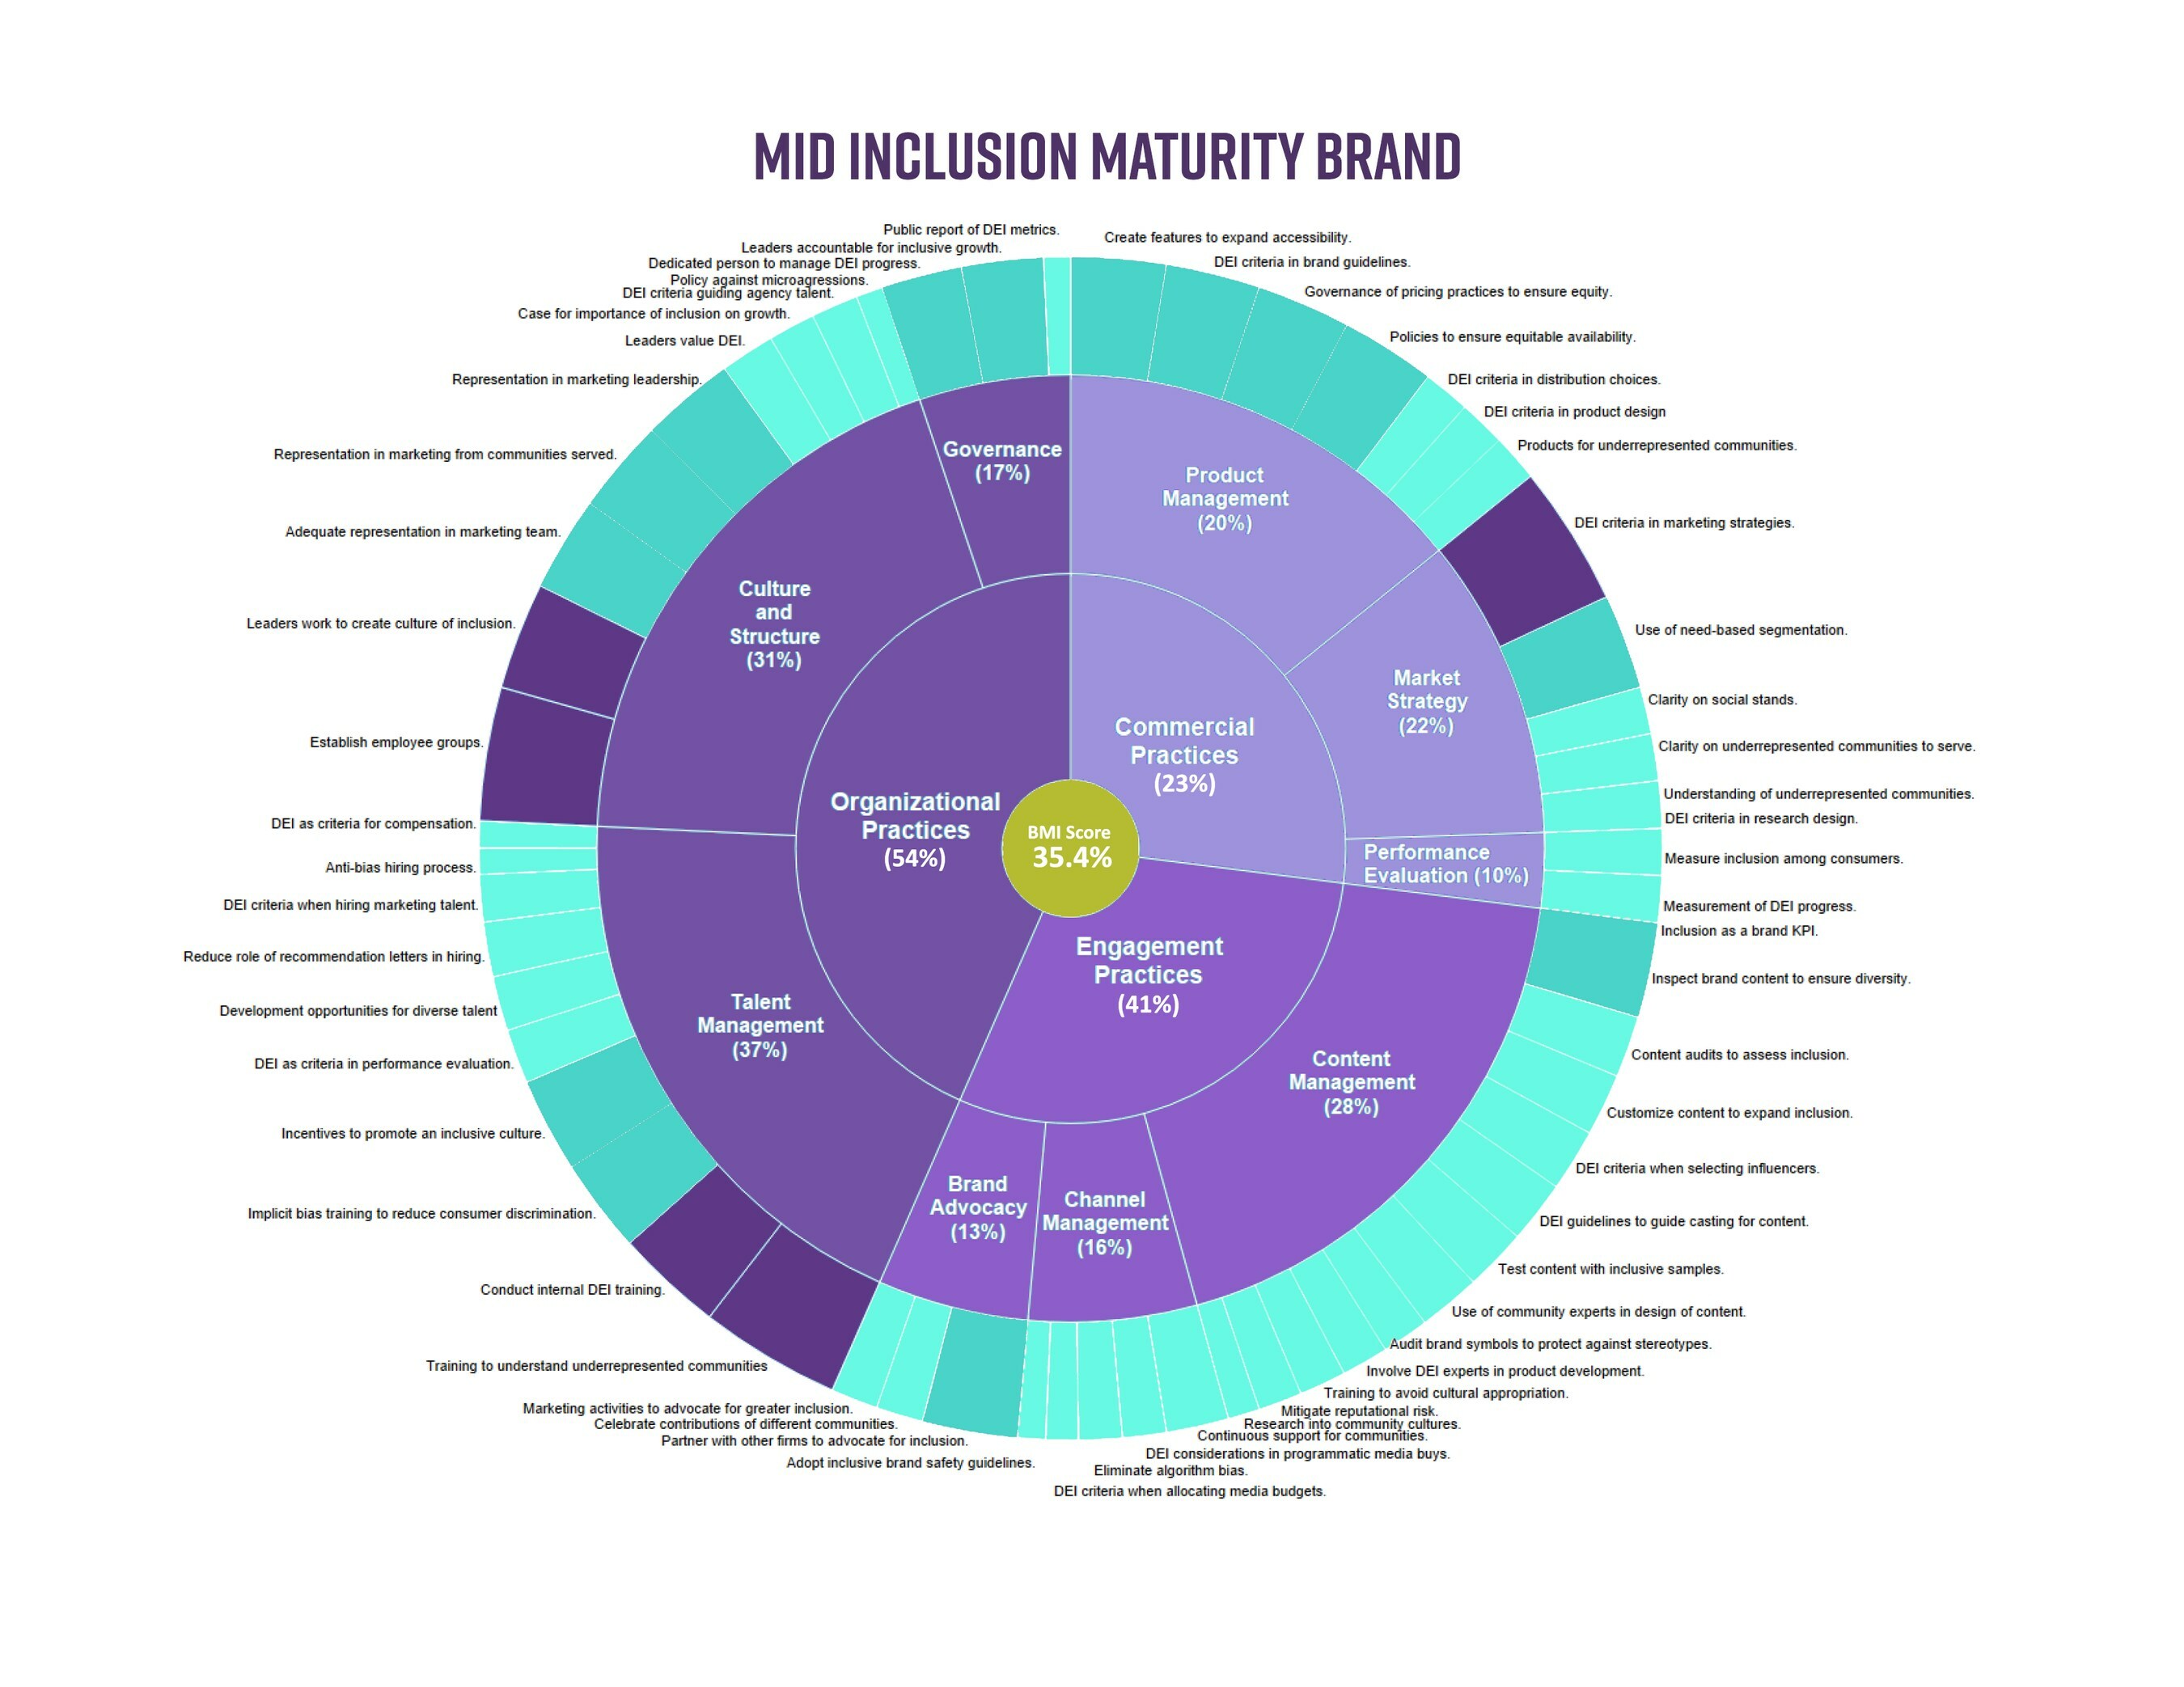 BRIDGE's Inclusion Maturity Assessment and Capability Building Framework (IMAX) Provides Brands with a Measurable Way to Maximize Inclusion Across Their Organizations